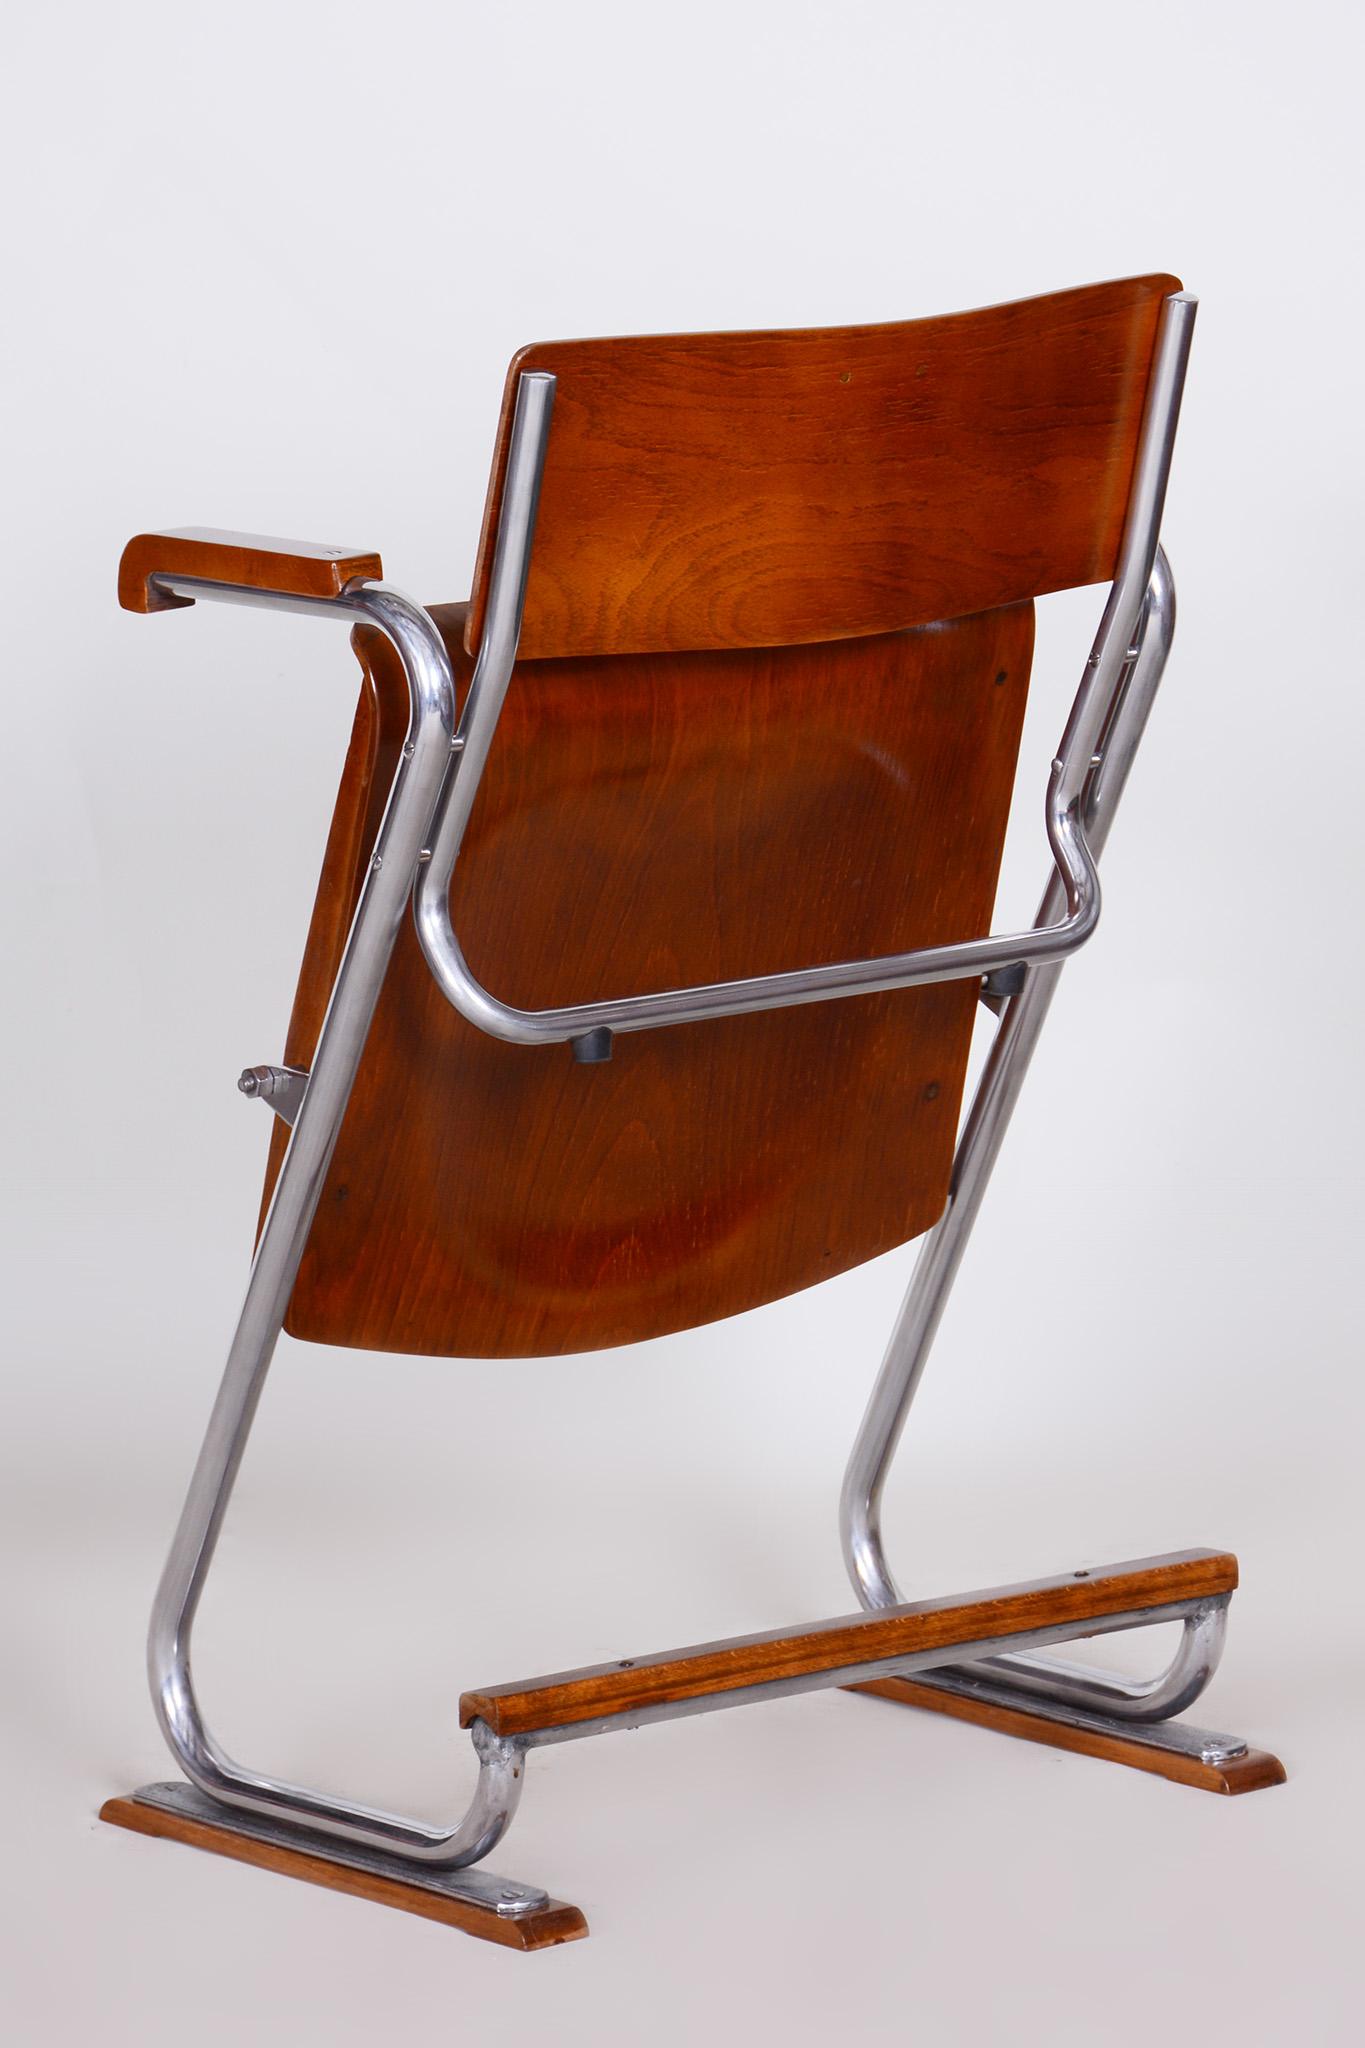 Chrome Restored Bauhaus Folding Chair, Beech Plywood, Revived Polish, Czechia, 1930s For Sale